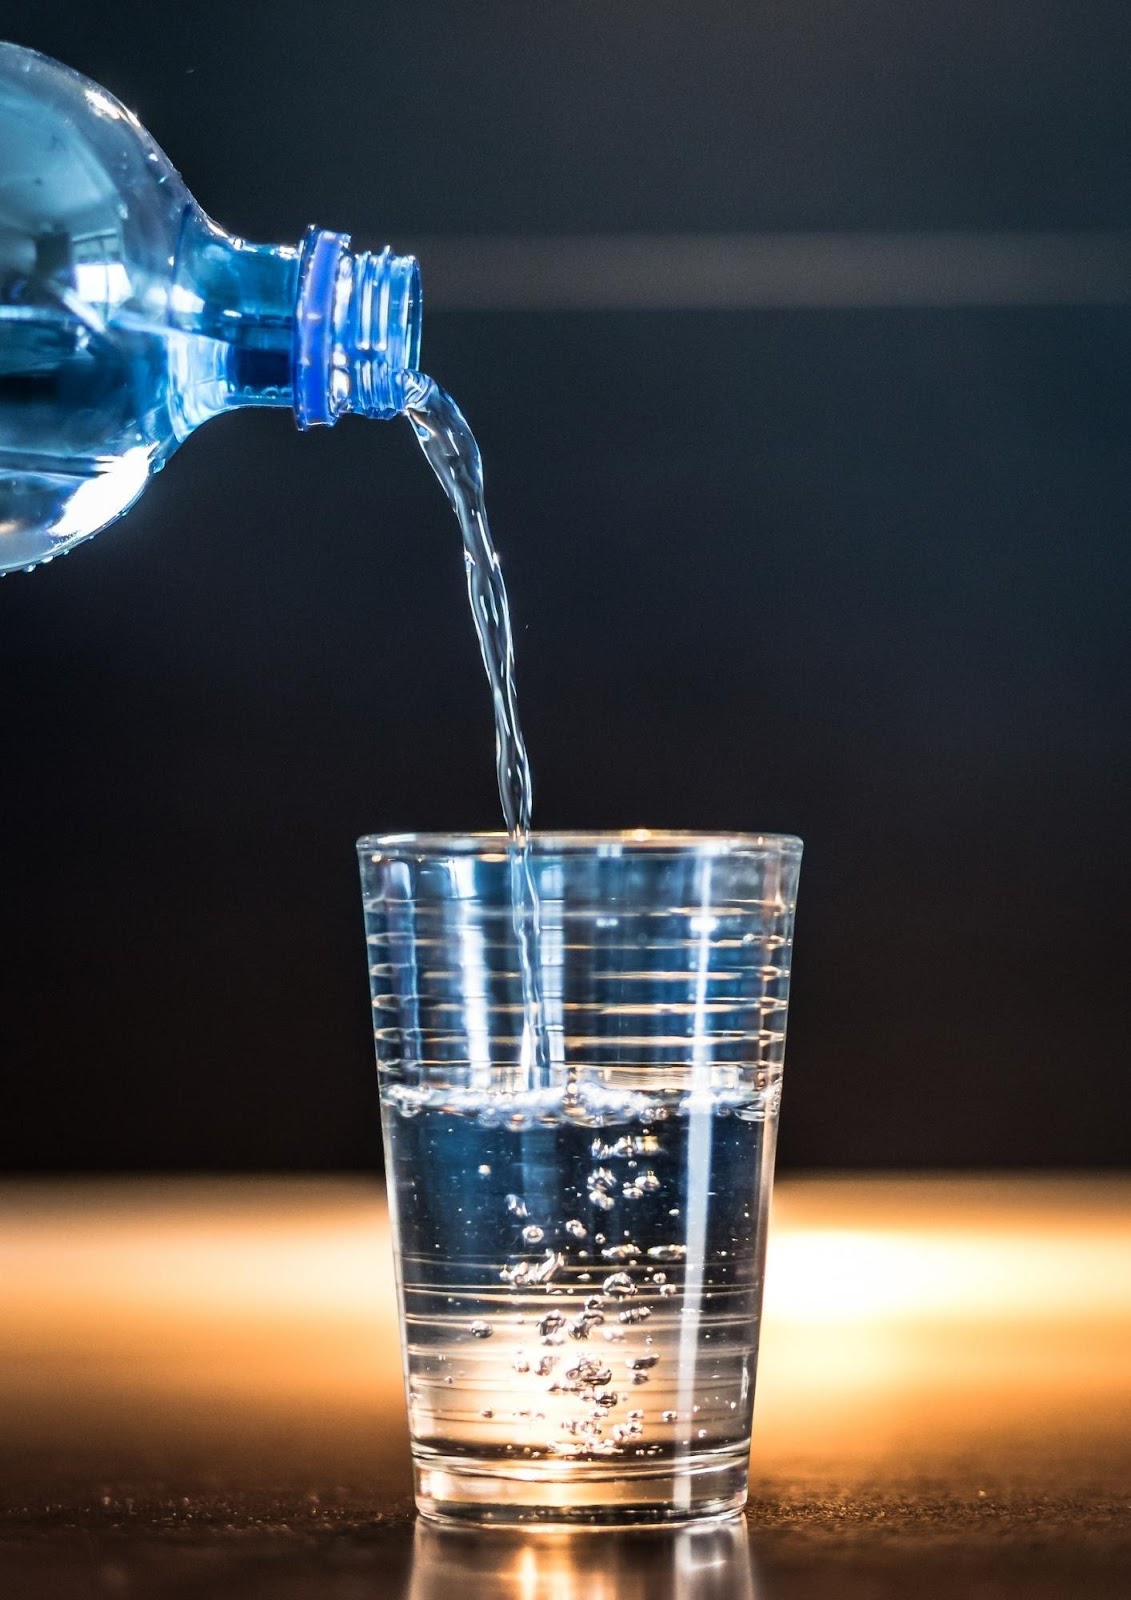 A picture containing glass, drinking water

Description automatically generated